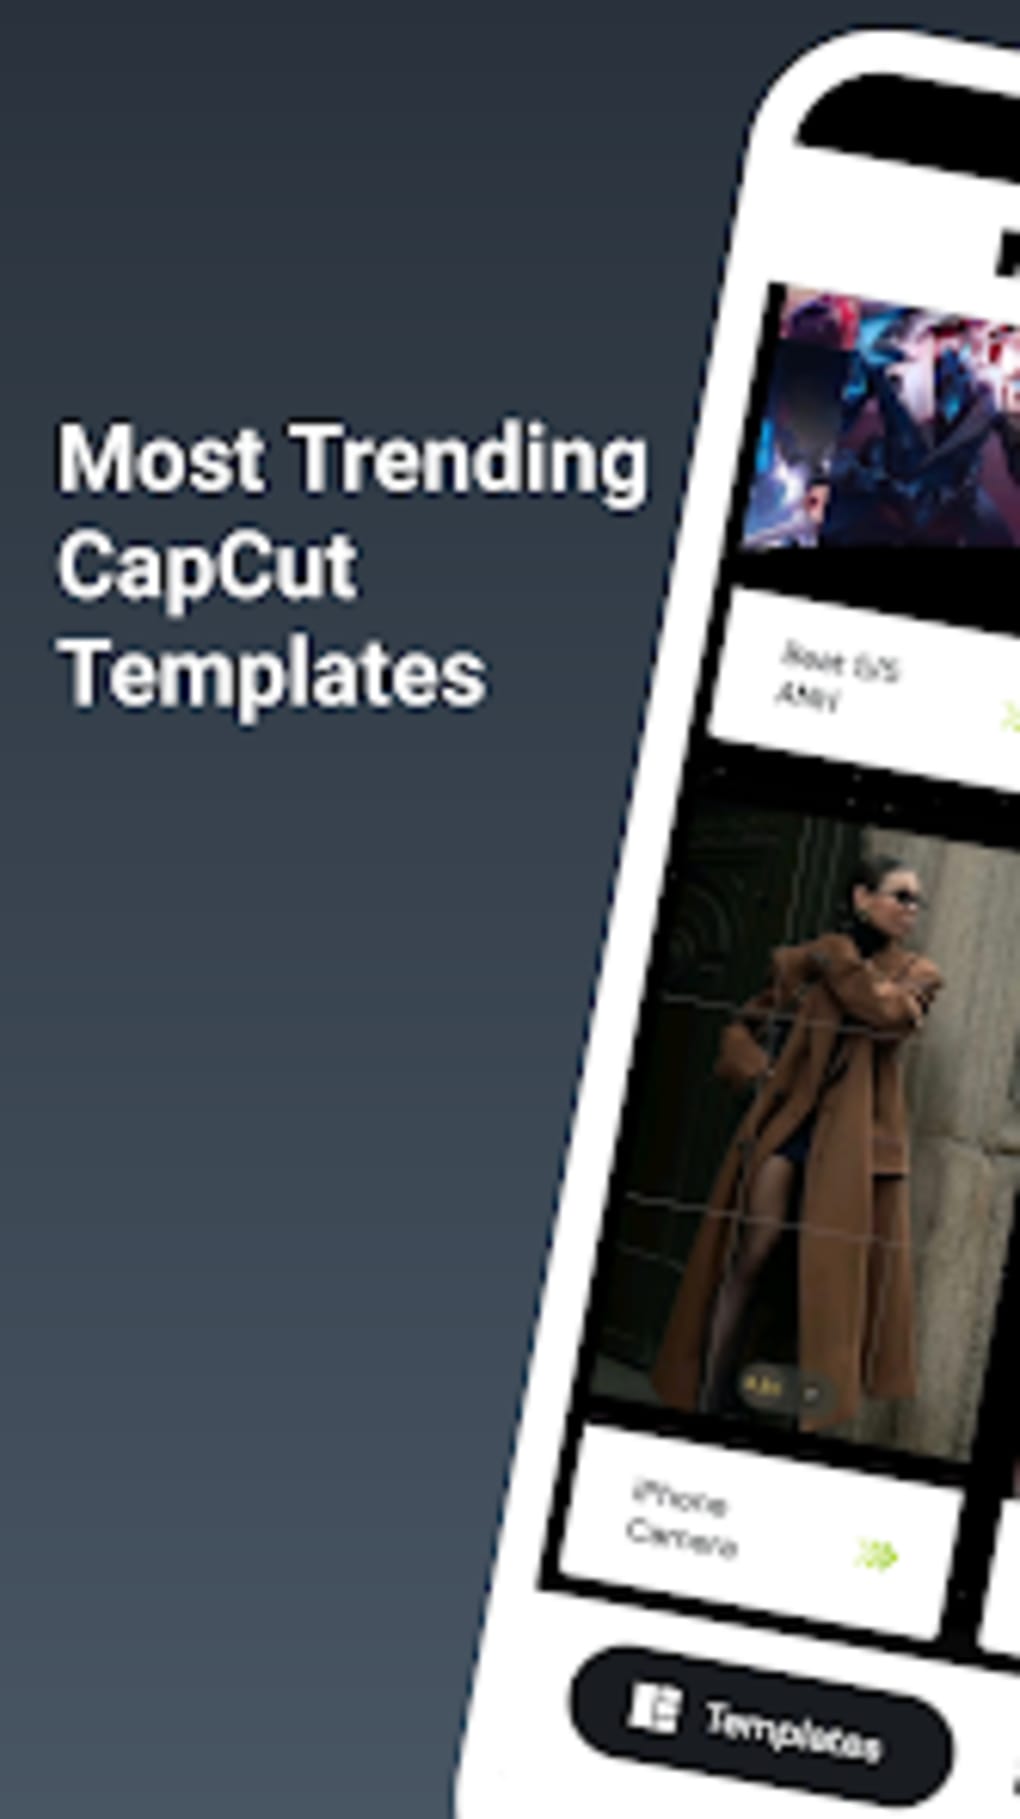 CapCut Templates Download for Android 無料・ダウンロード